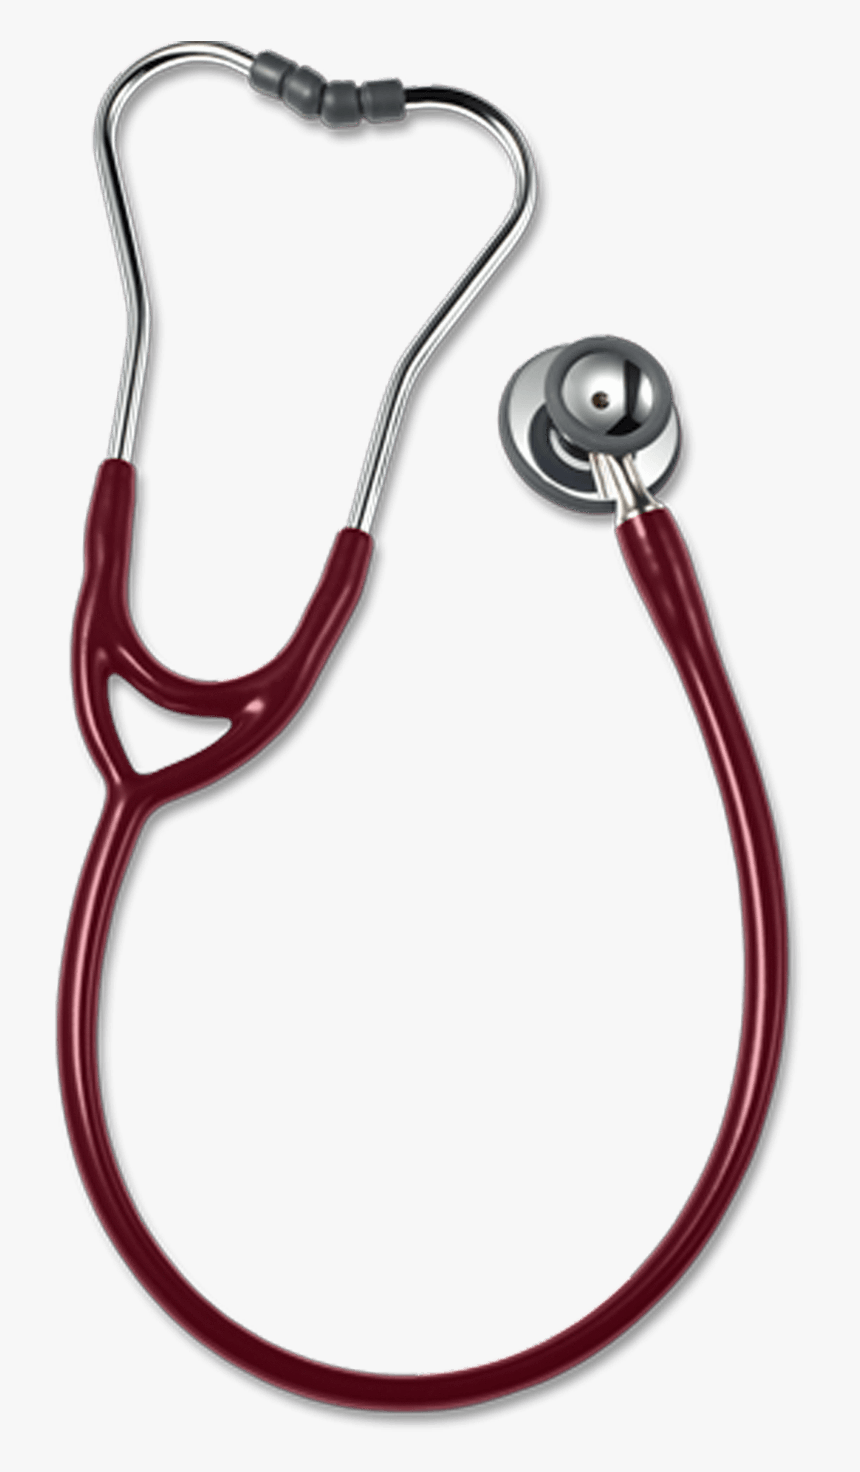 Stethescope Png, Transparent Png, Free Download